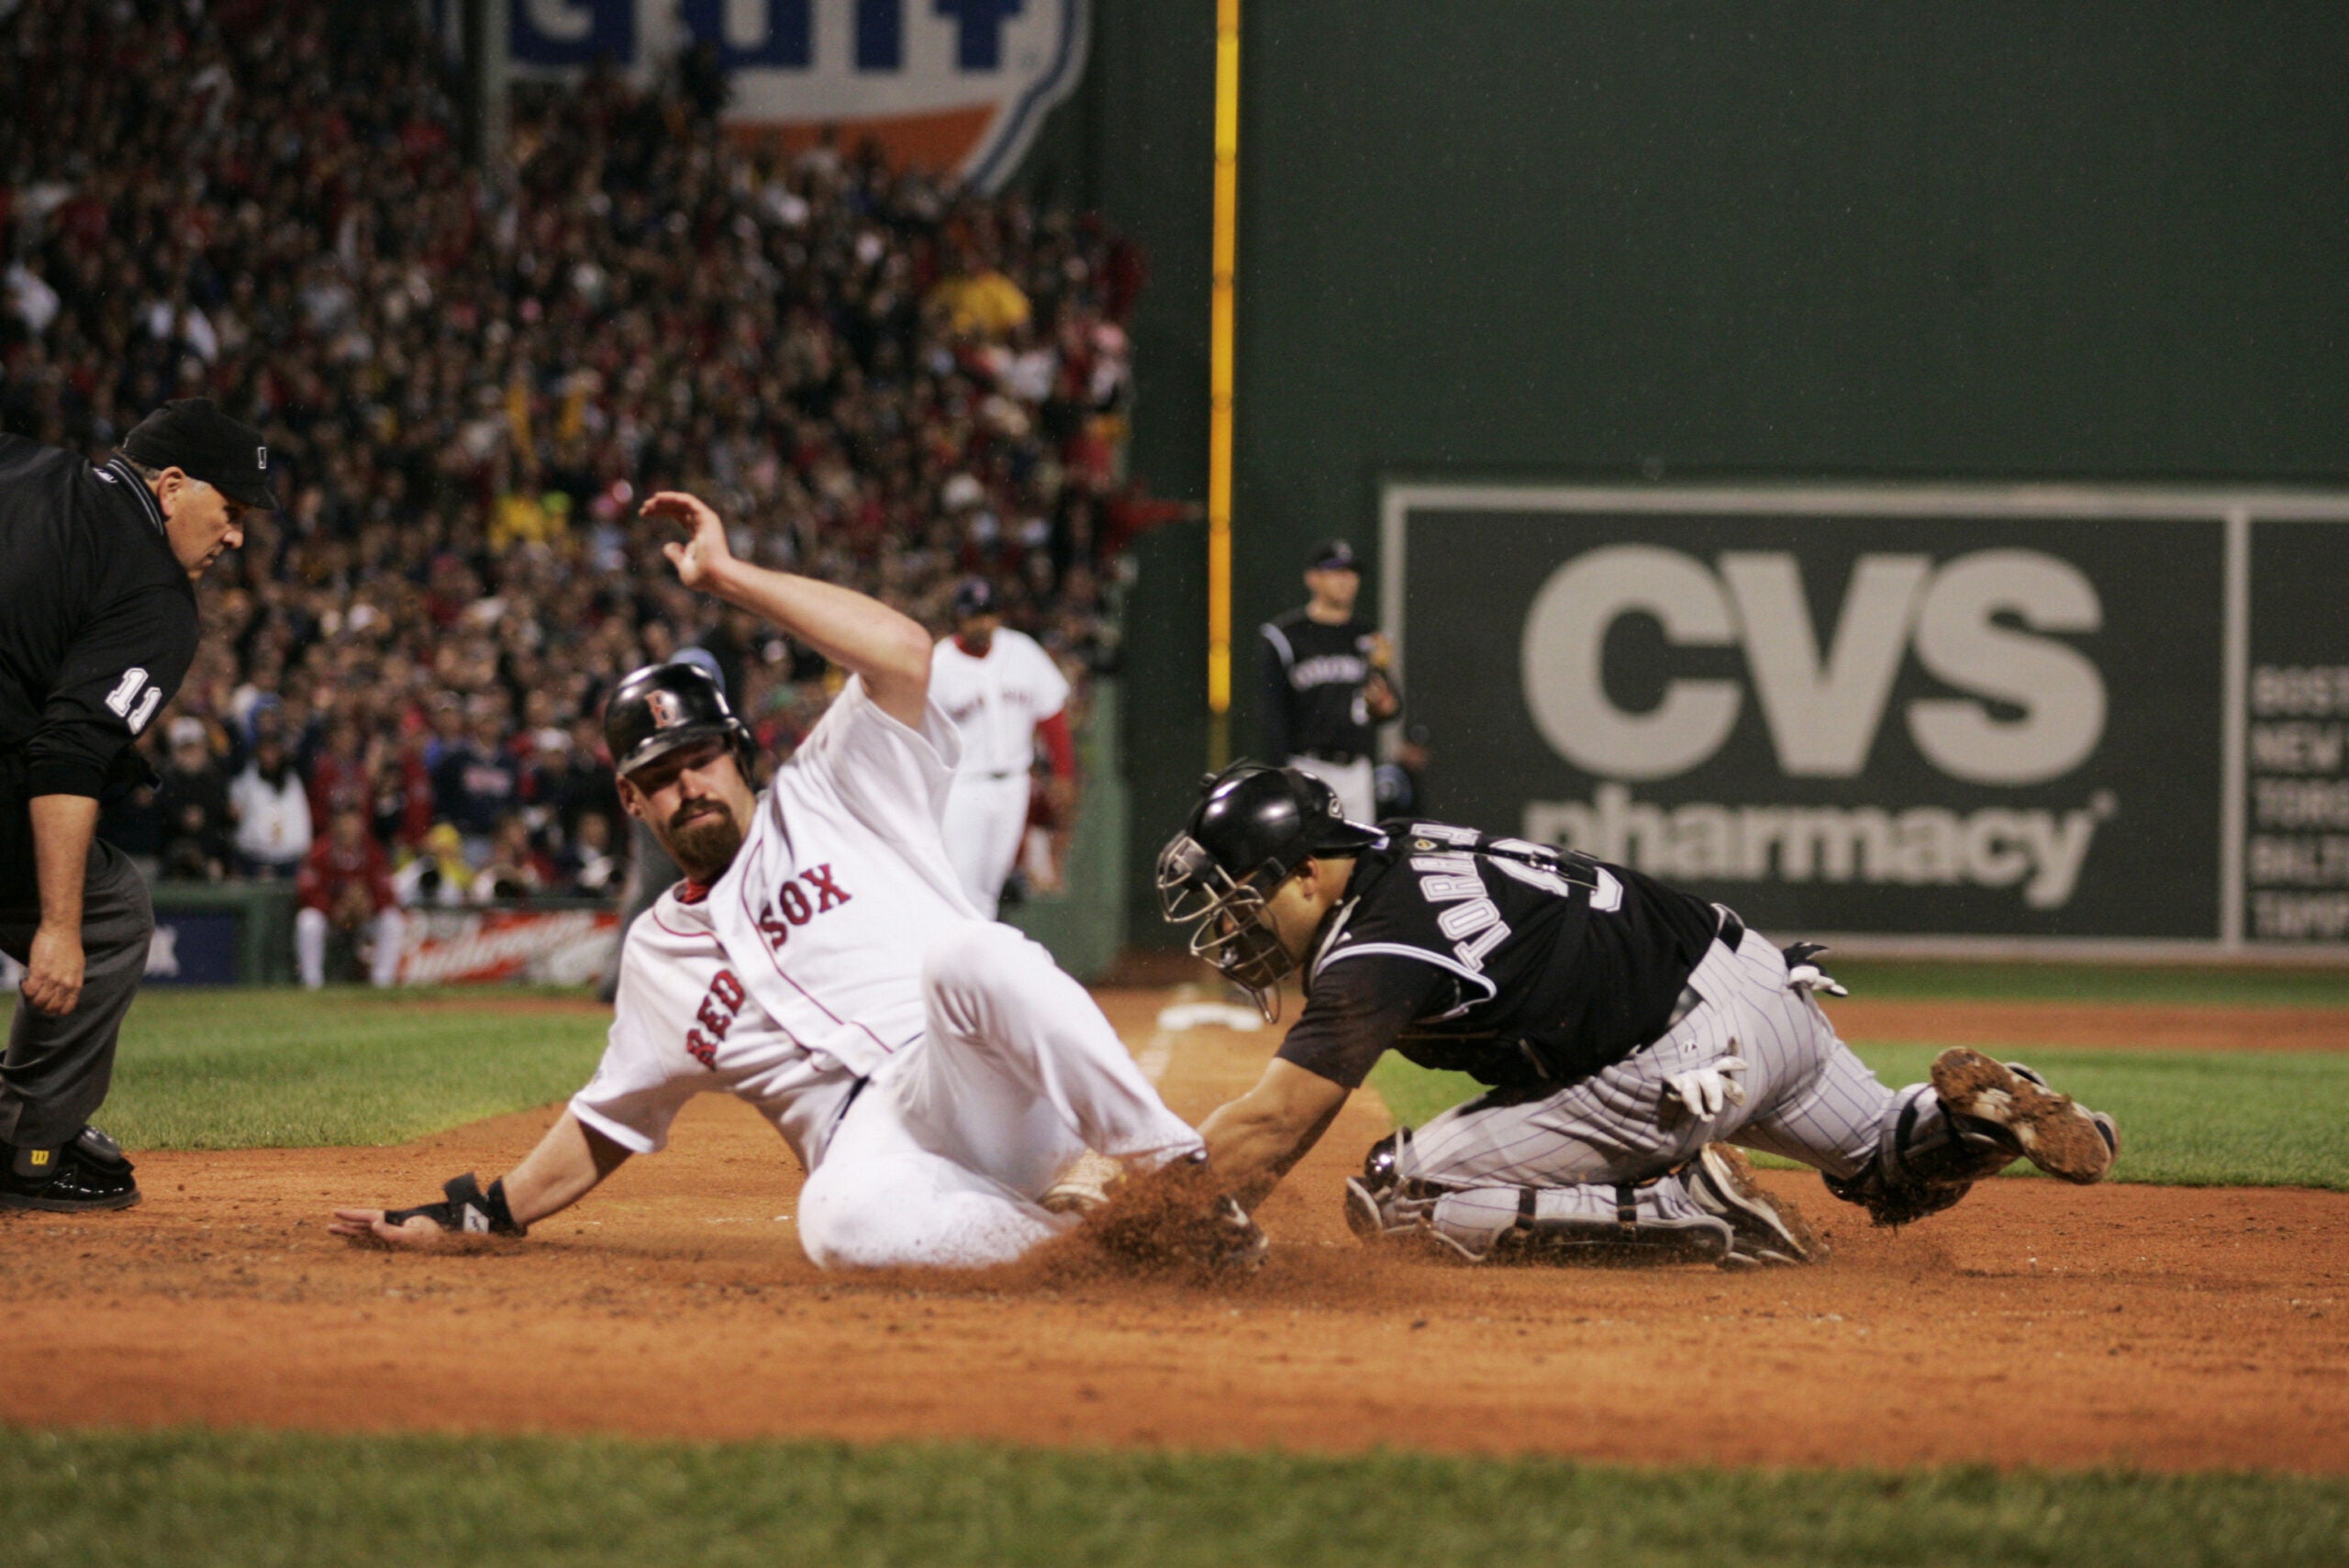 With Kevin Youkilis set to enter the Red Sox Hall of Fame, will